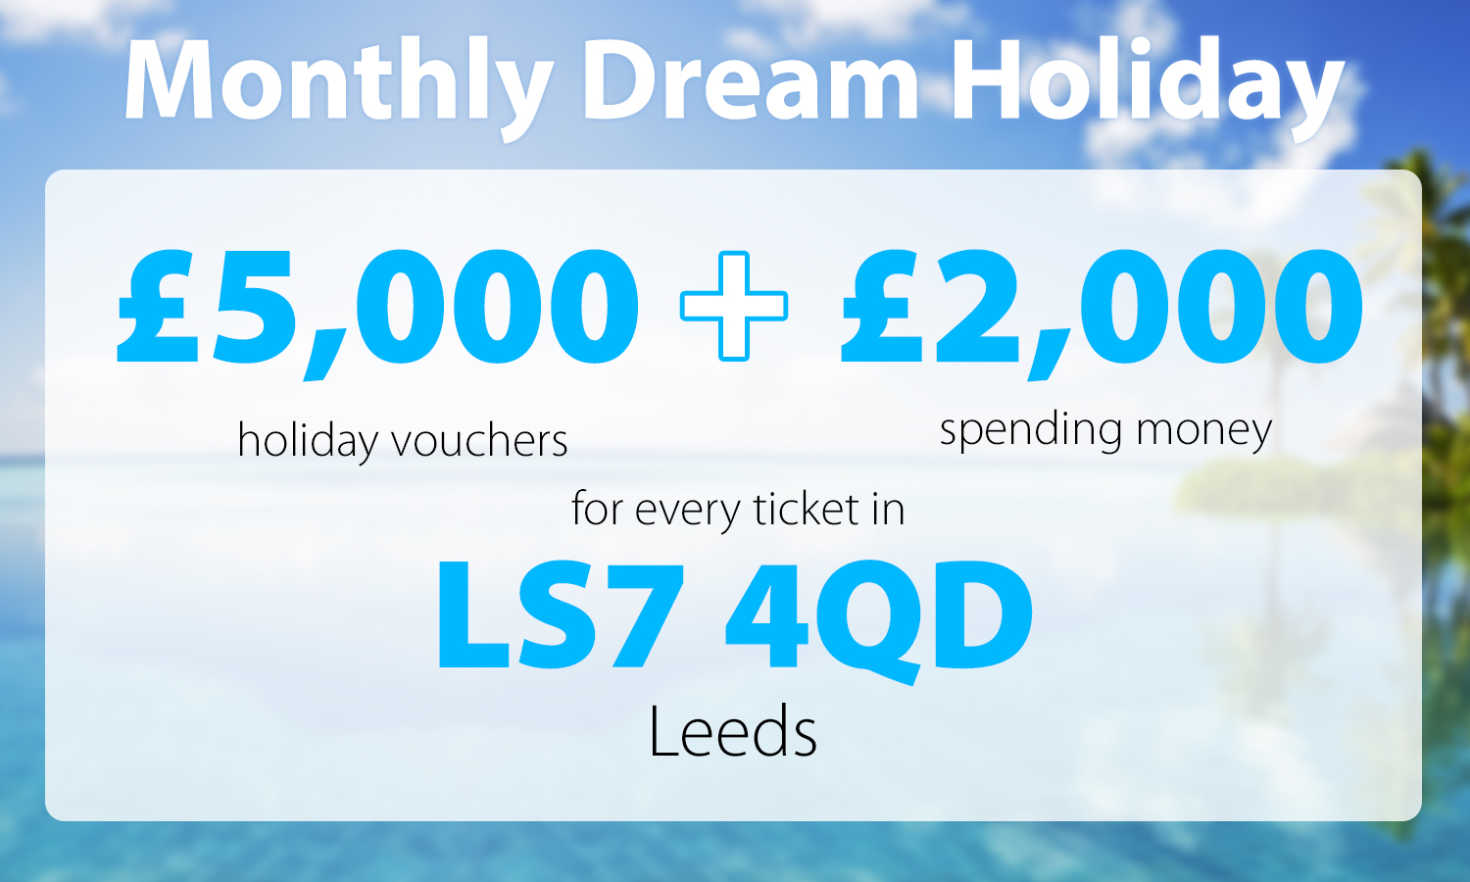 Two Leeds players are going to jet off on fabulous holidays thanks to their lucky postcode